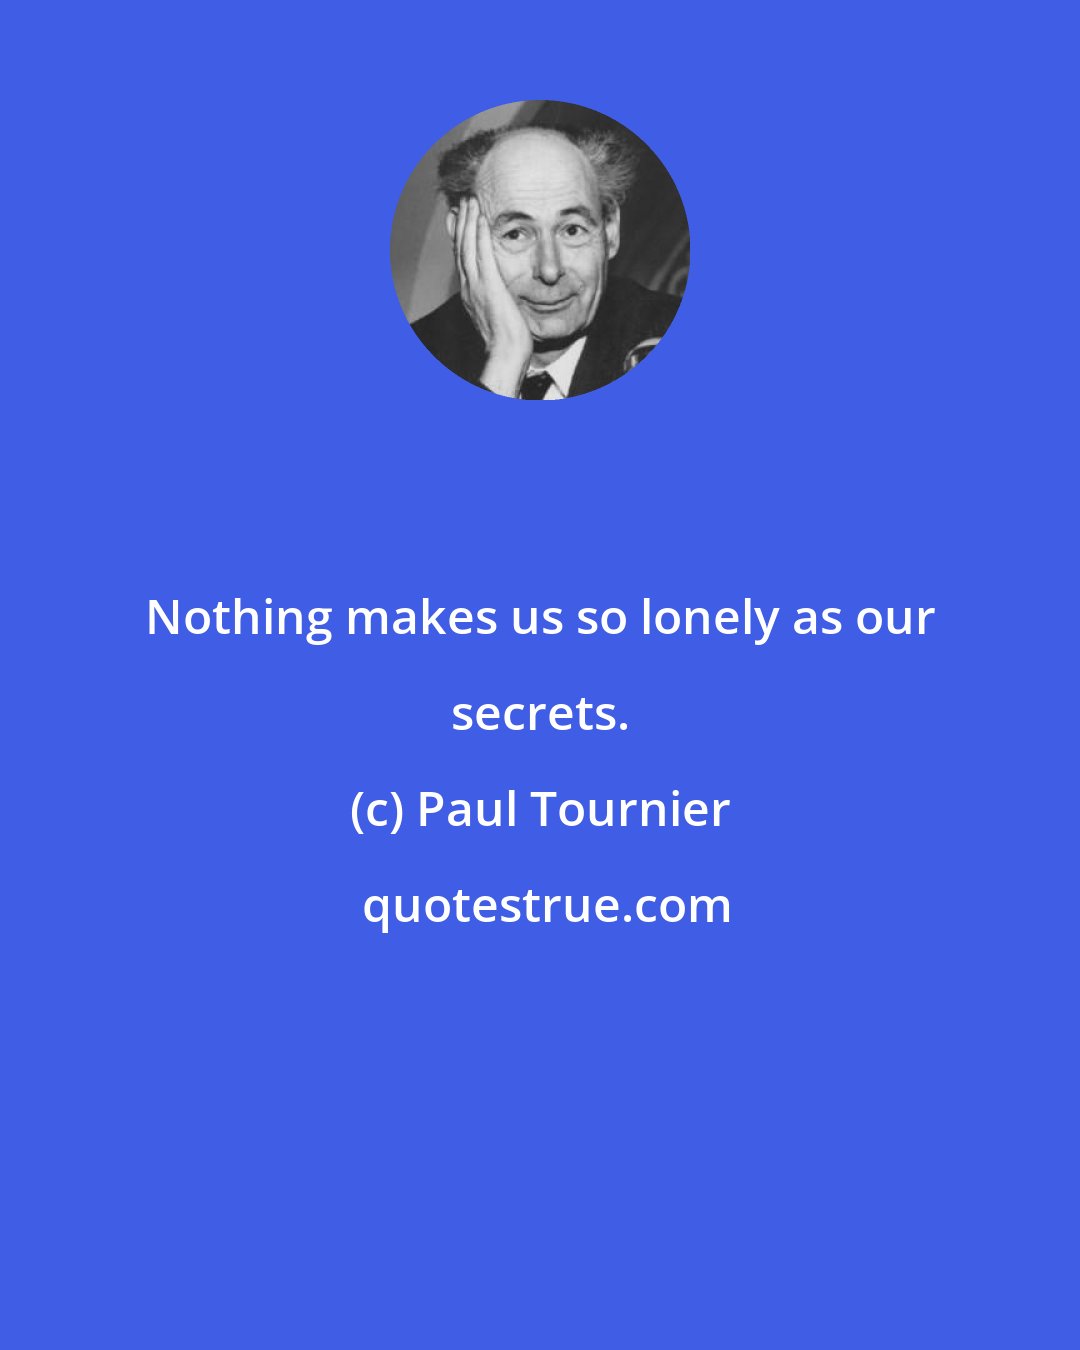 Paul Tournier: Nothing makes us so lonely as our secrets.